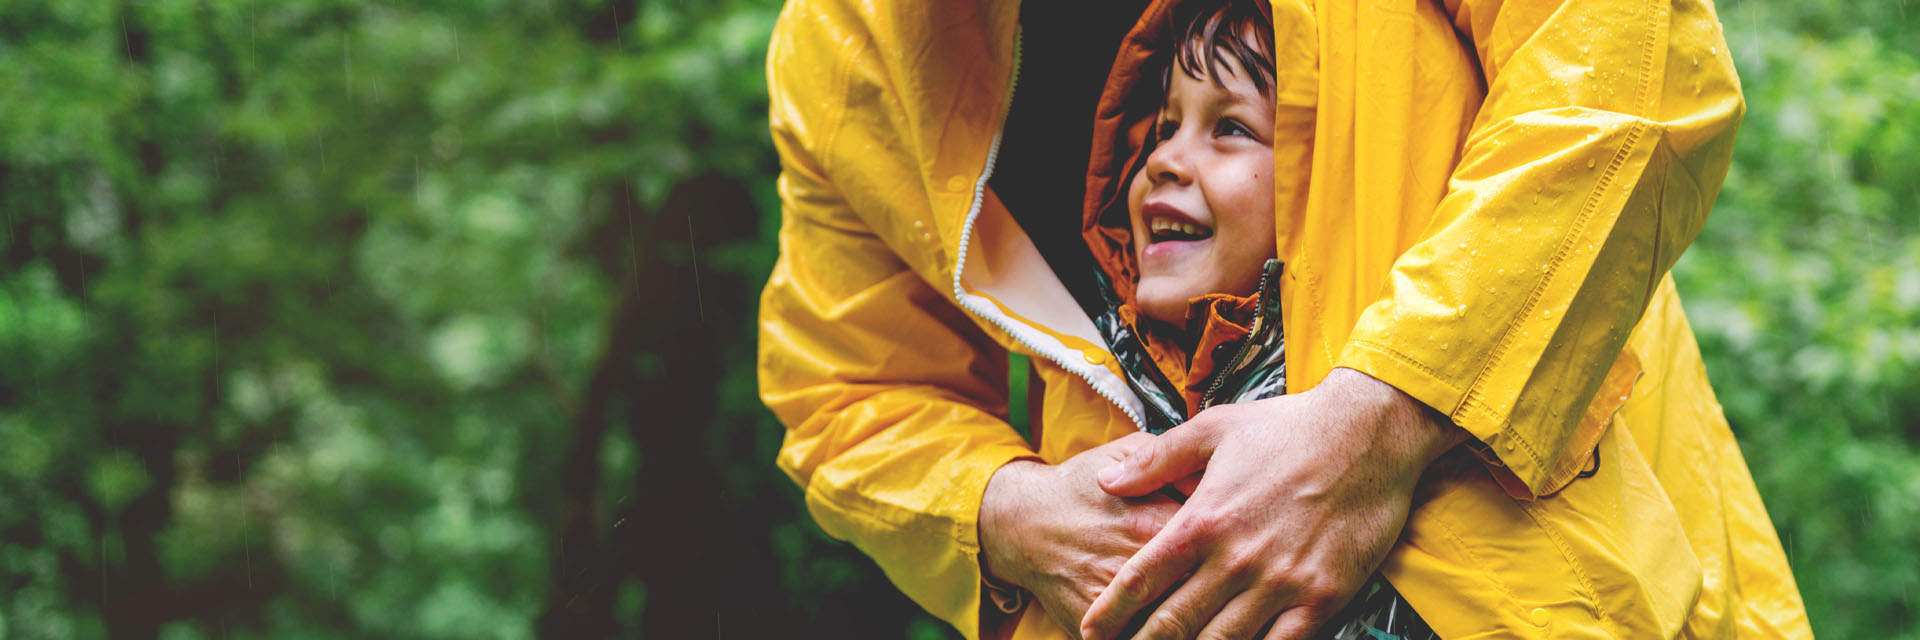 Image showing a Dad covering his son with his raincoat